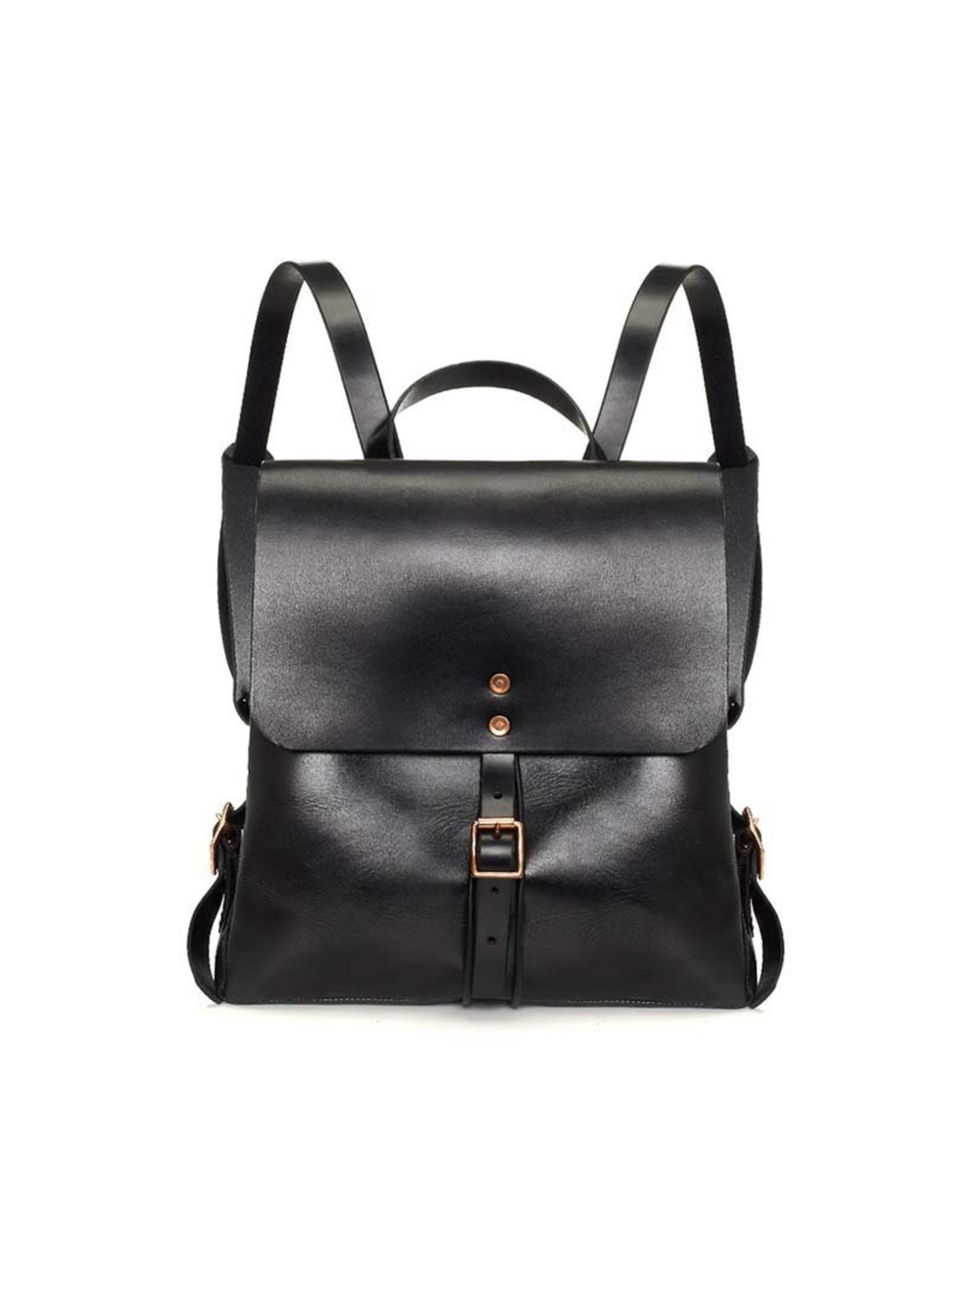 <p>Swap your canvas backpack for this sleek, office-friendly version.</p><p>Alfie Douglas backpack, £260 at <a href="http://www.avenue32.com/whats-new/black-leather-medium-backpack-19701.html">Avenue32</a></p>